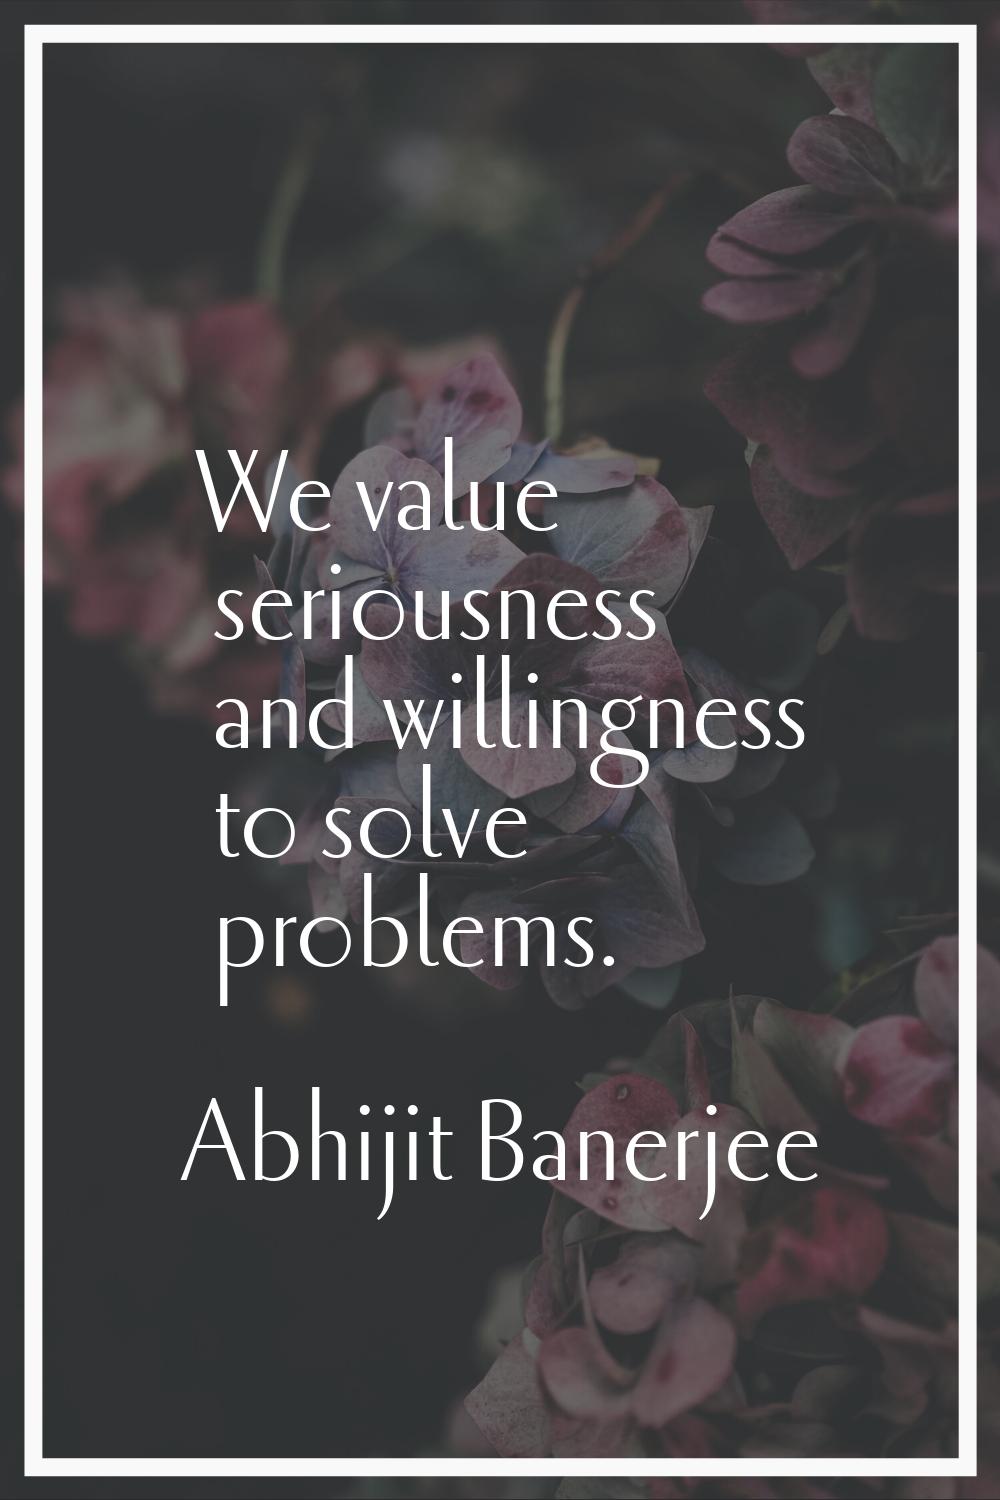 We value seriousness and willingness to solve problems.